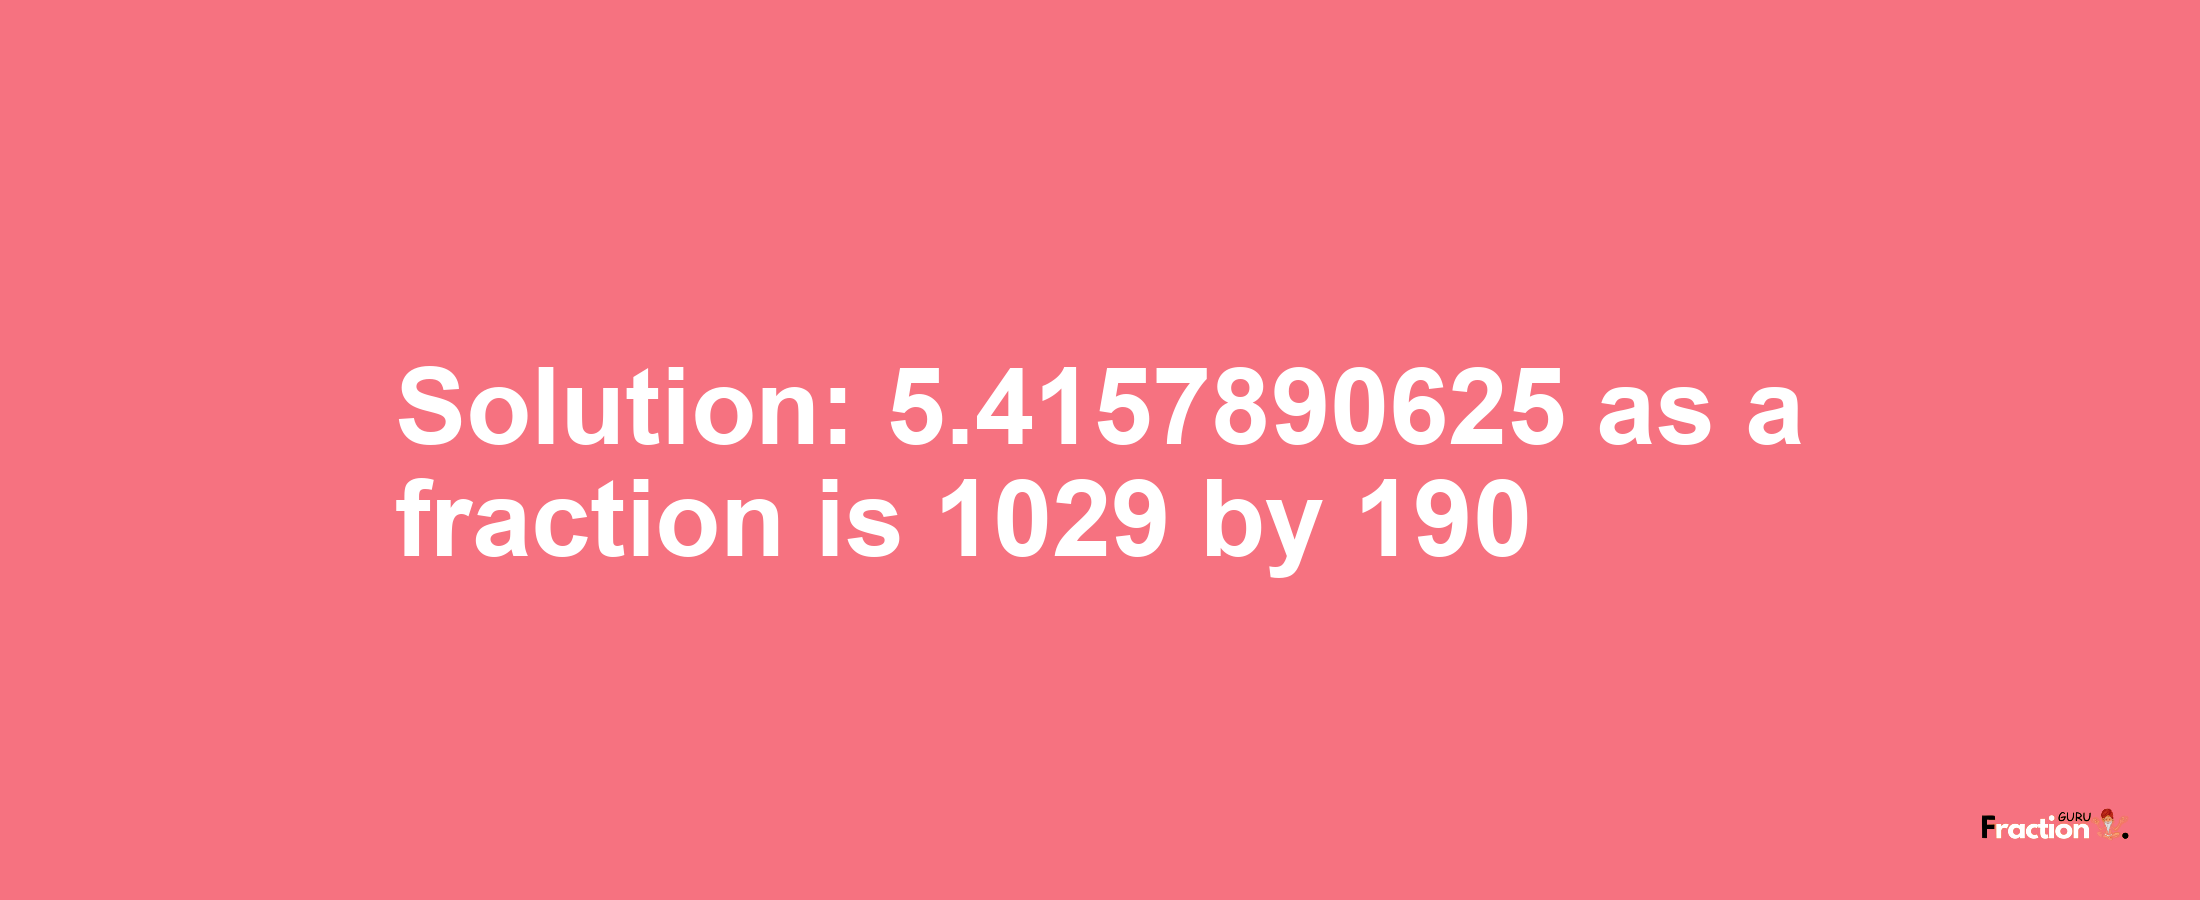 Solution:5.4157890625 as a fraction is 1029/190